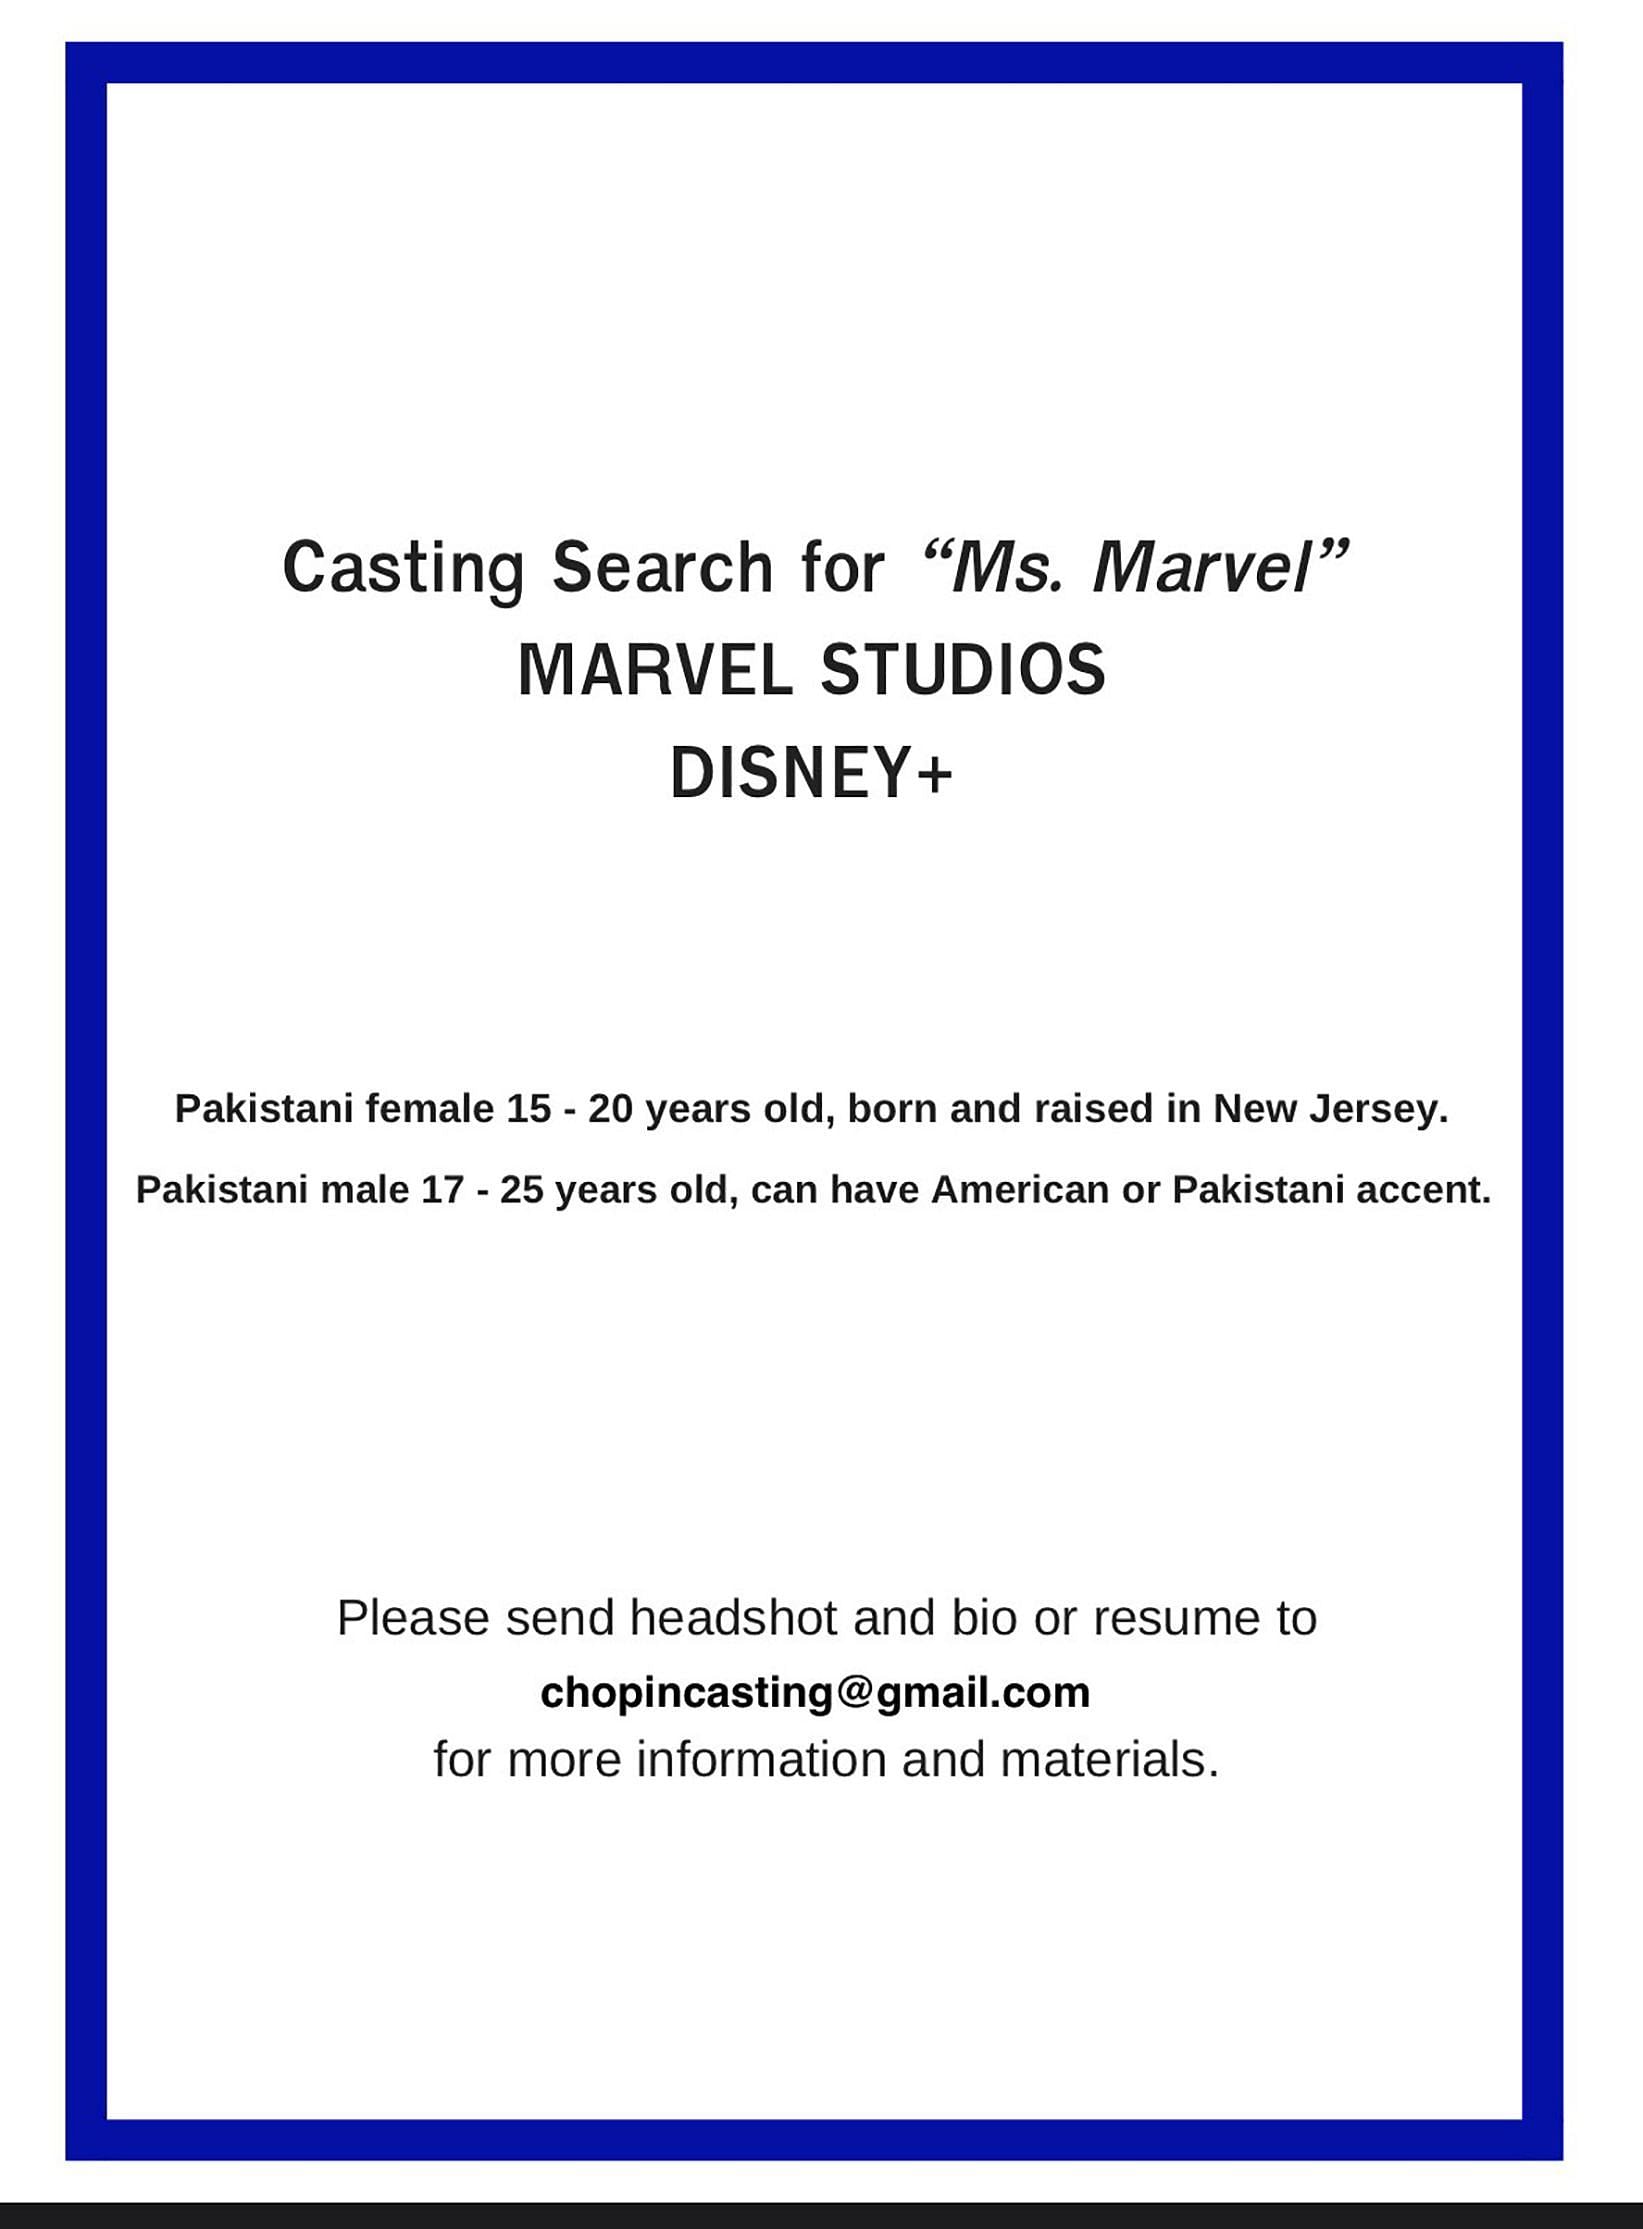 The casting call for Ms. Marvel